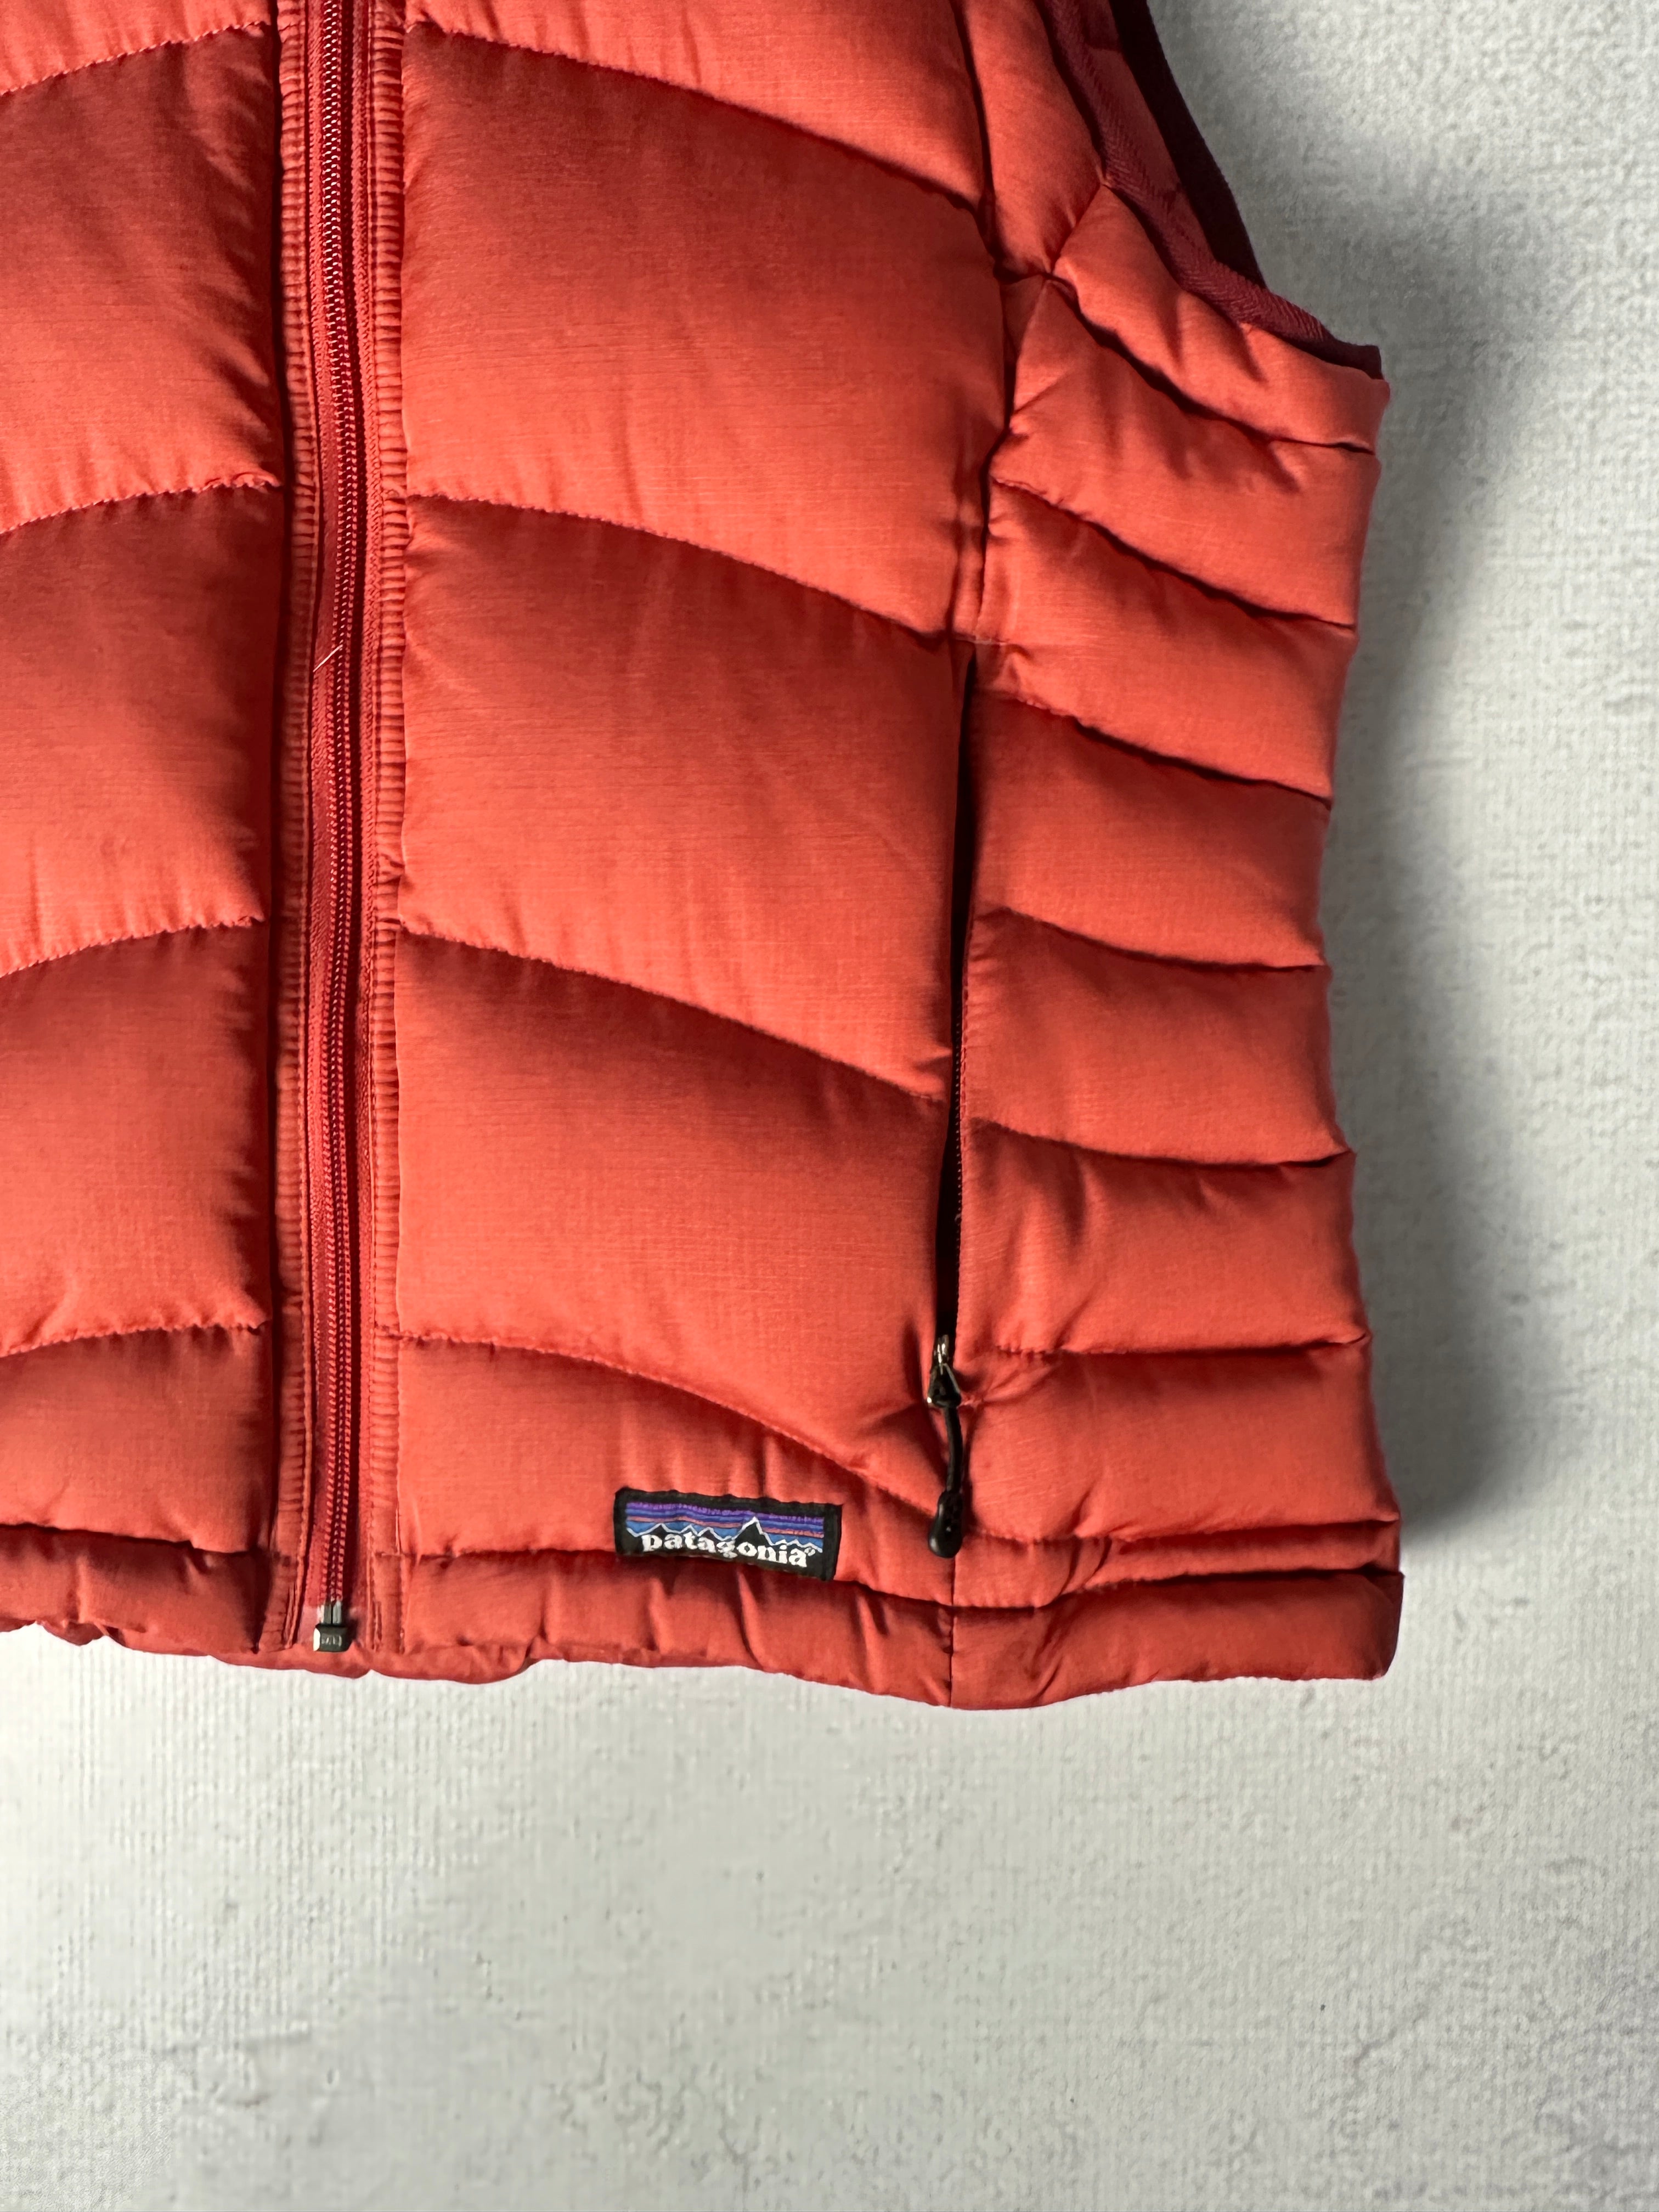 Vintage Patagonia Puffer Vest - Women's Small